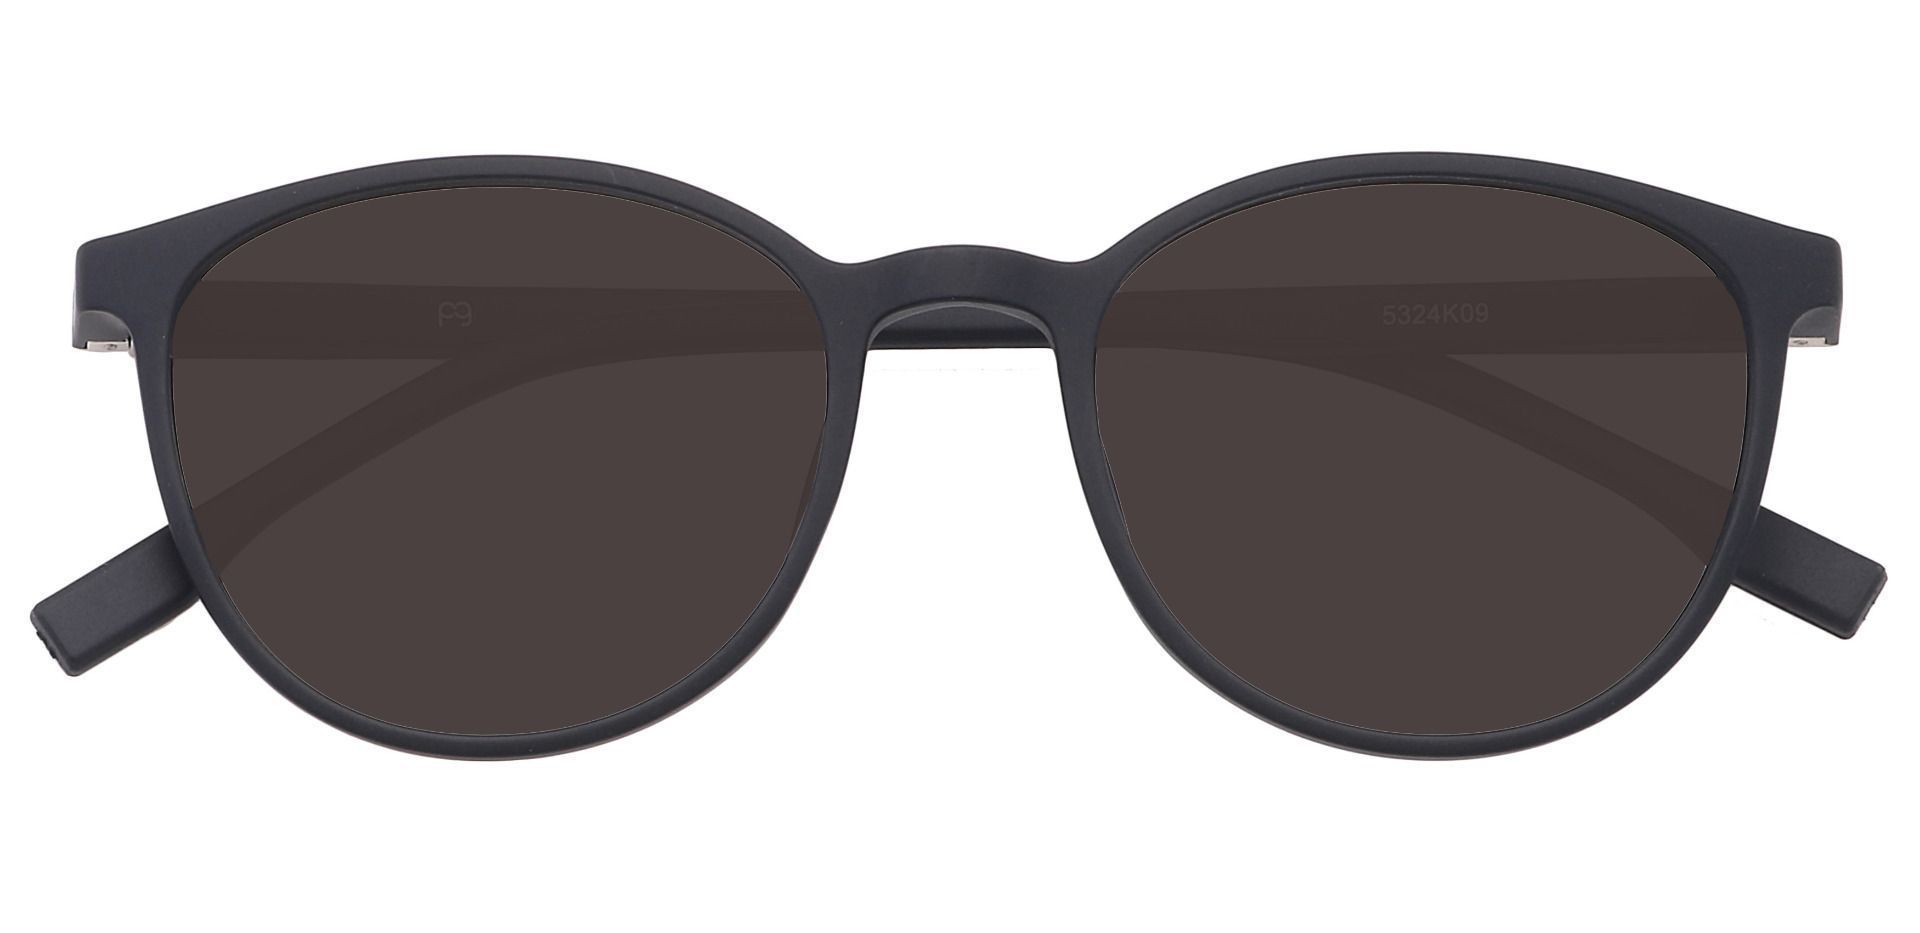 Bay Round Non-Rx Sunglasses - Black Frame With Gray Lenses